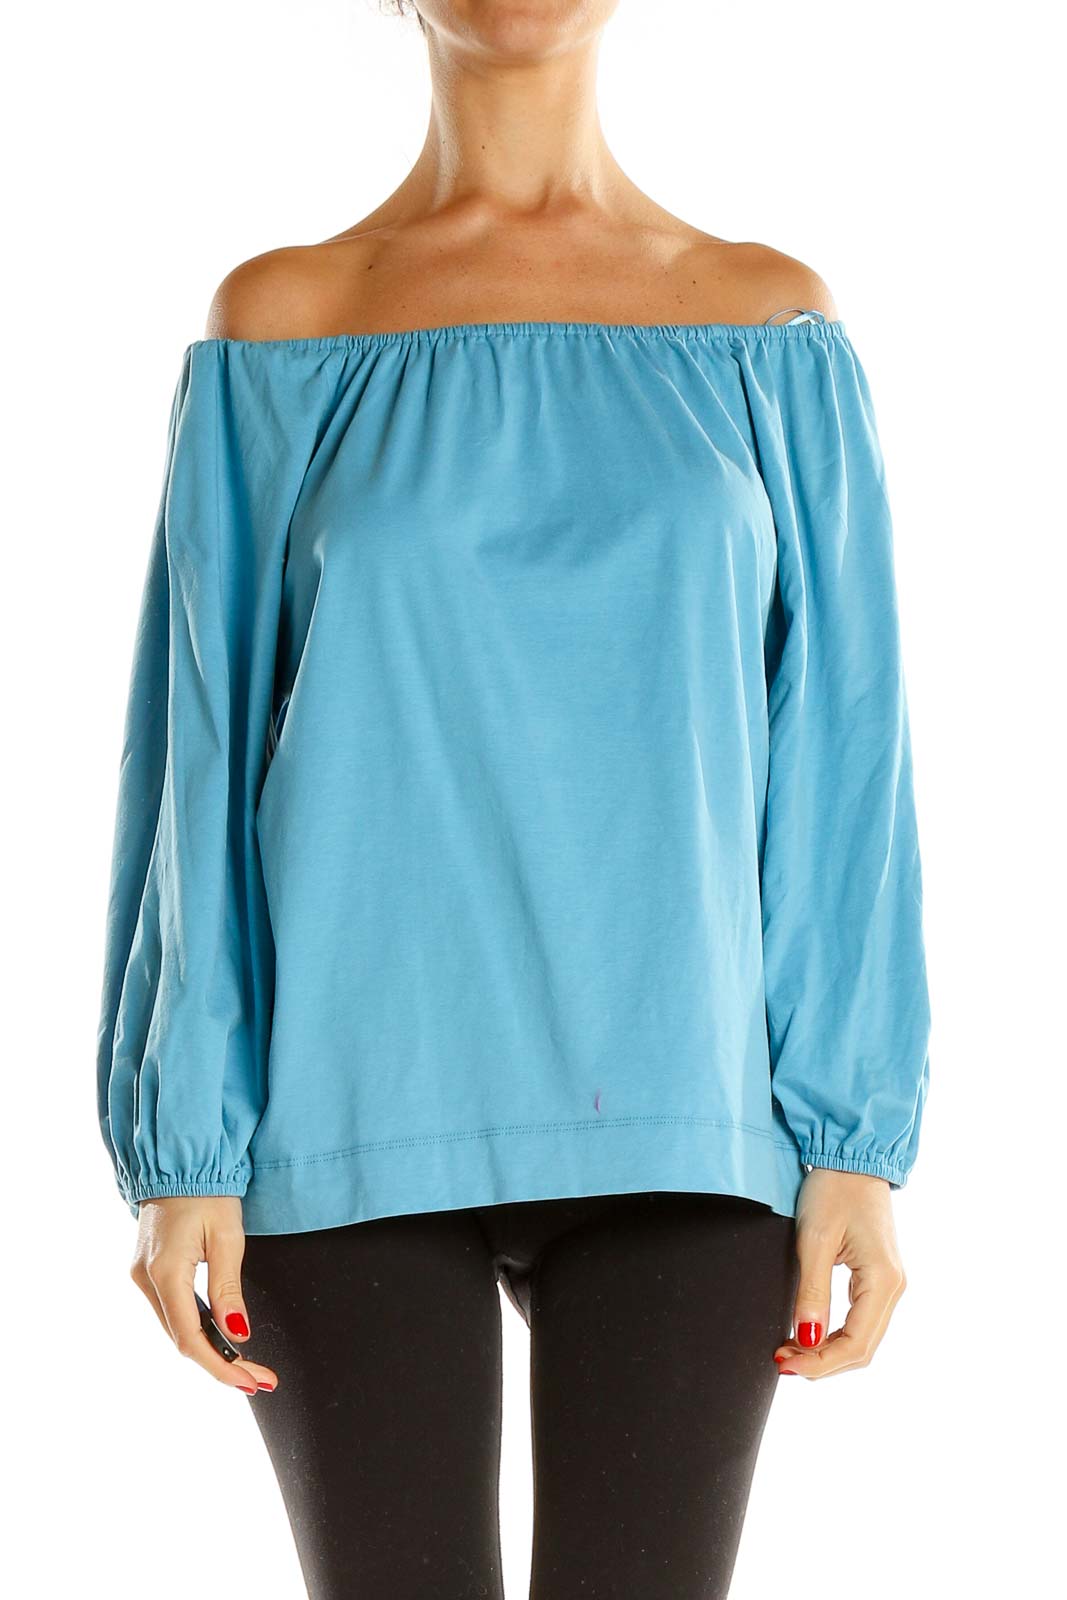 Blue Casual Off The Shoulder Top Front